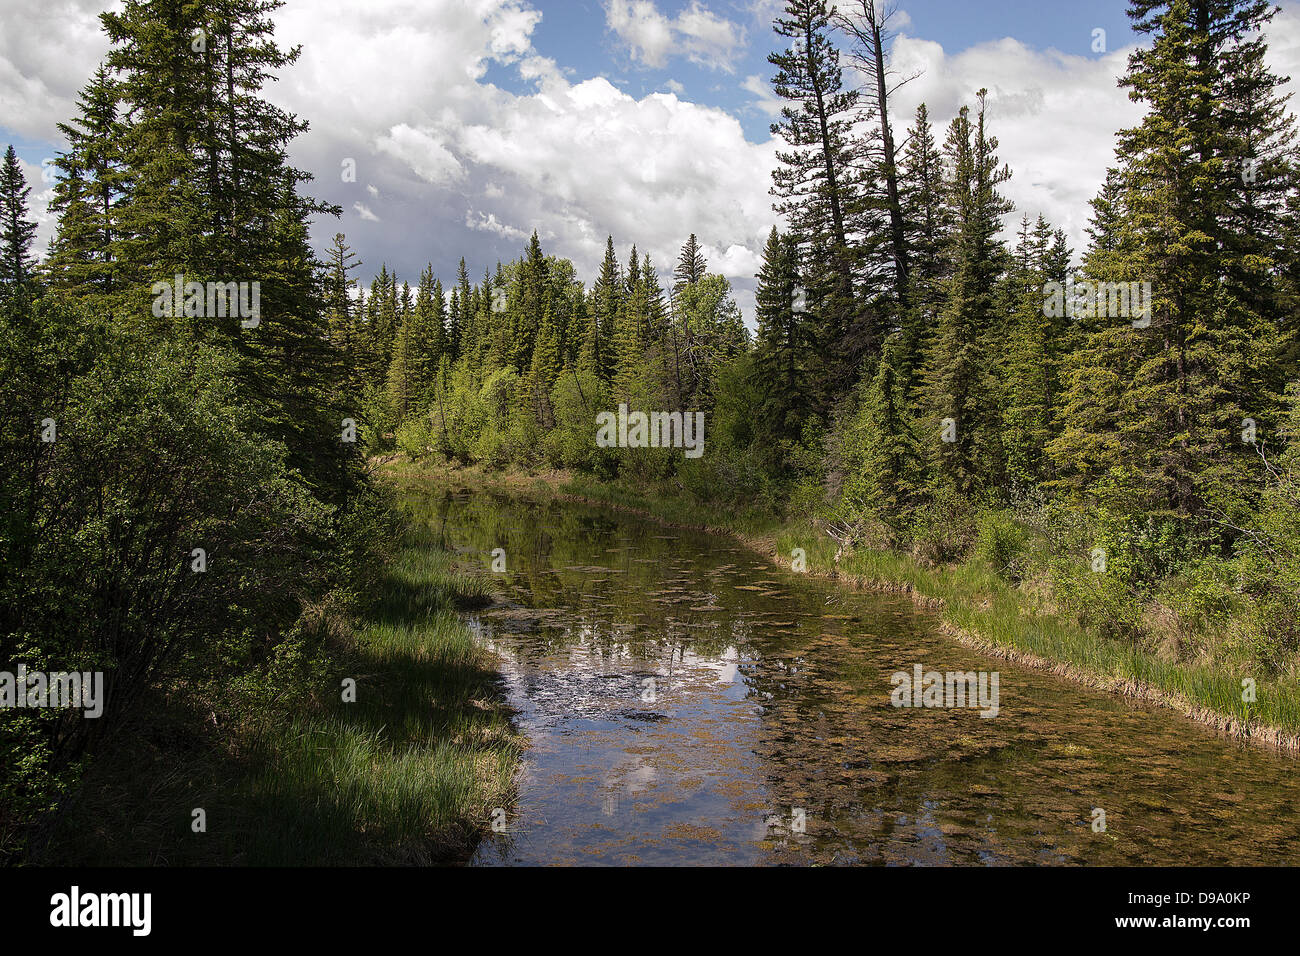 Elbow river, landscape, river, storm, thunder, spring, summer, hike, path, fishing, forest, farm, fence, clouds Stock Photo